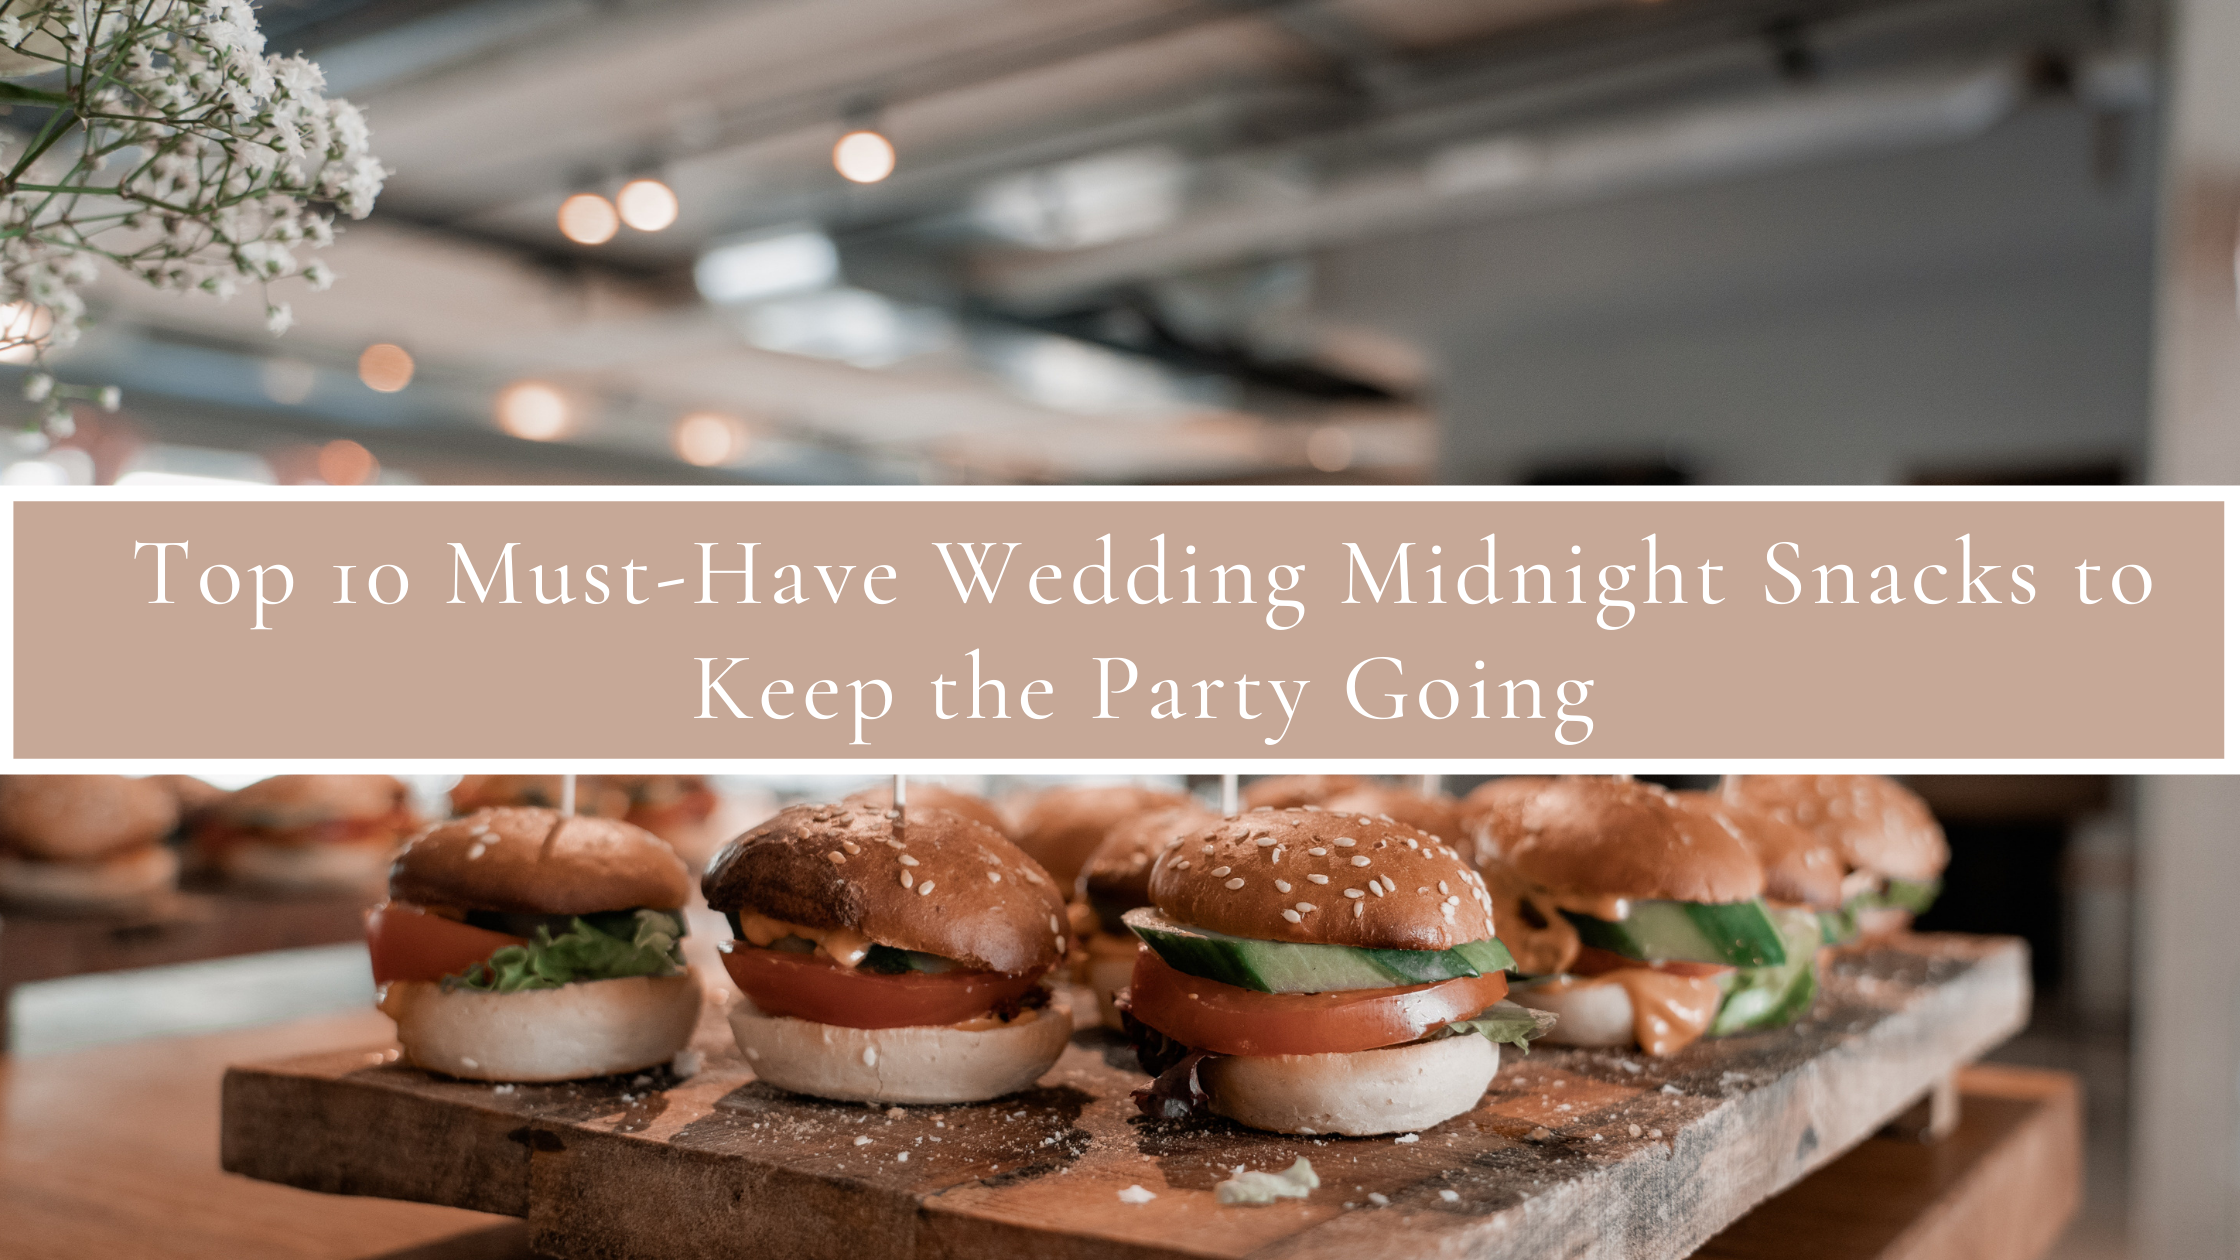 Top 10 Must-Have Wedding Midnight Snacks to Keep the Party Going